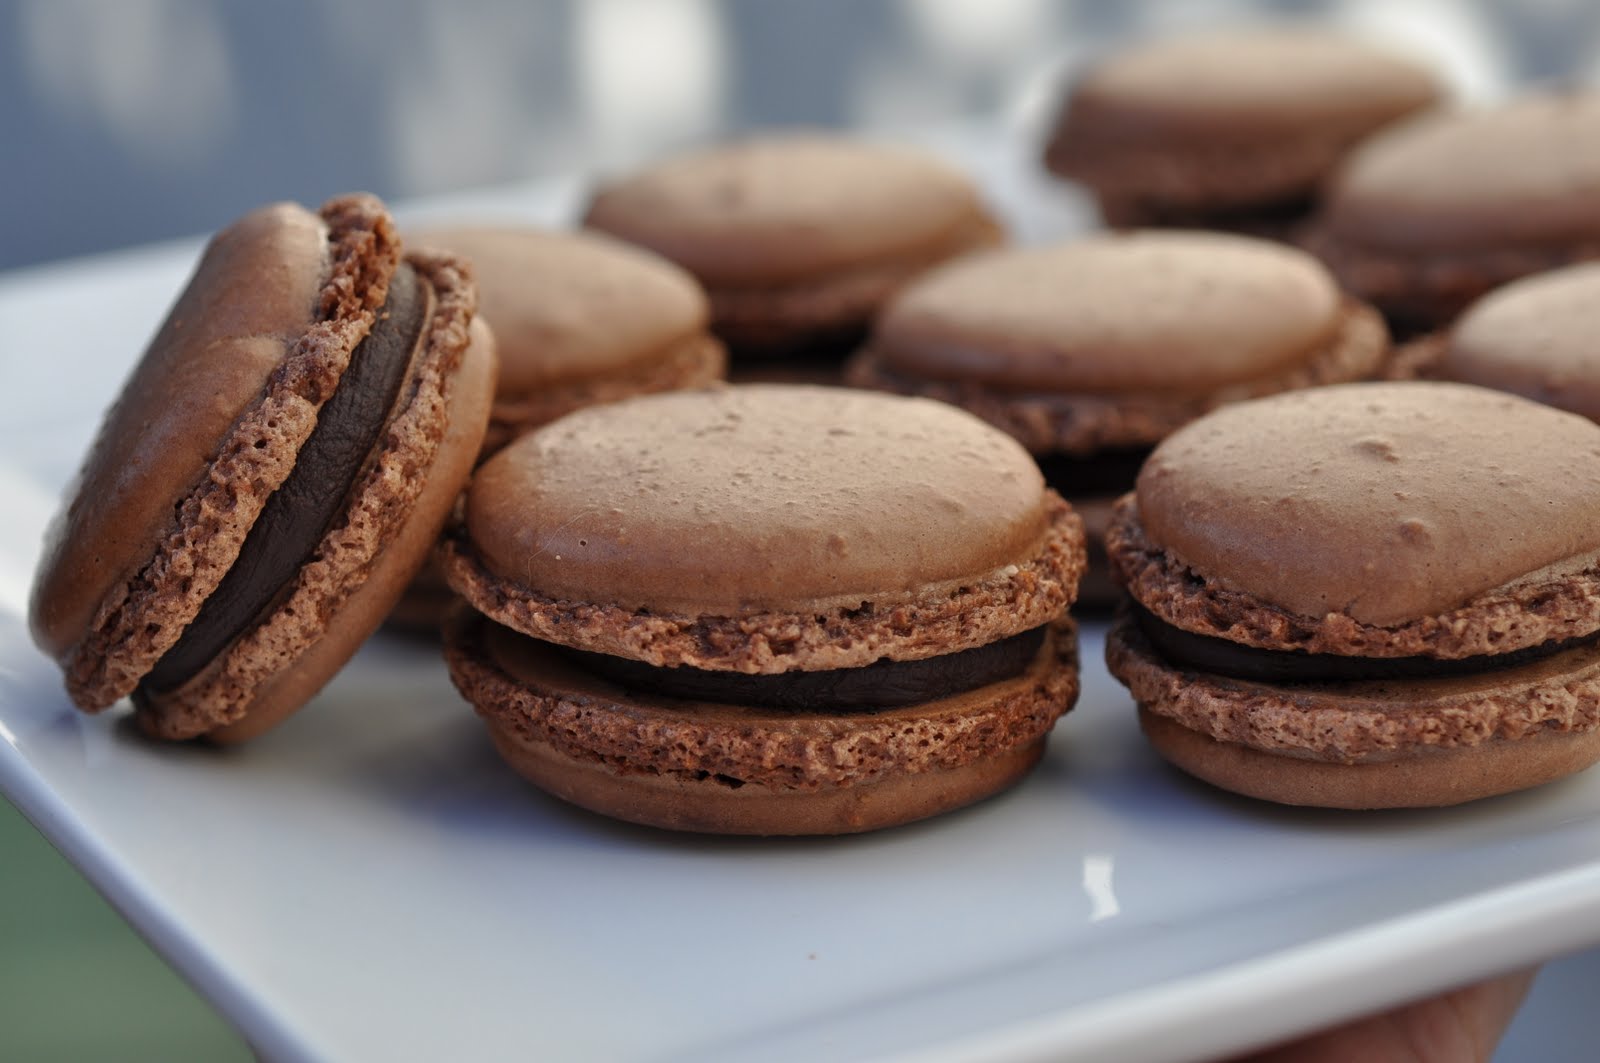 Lethally Delicious: Chocolate Macarons